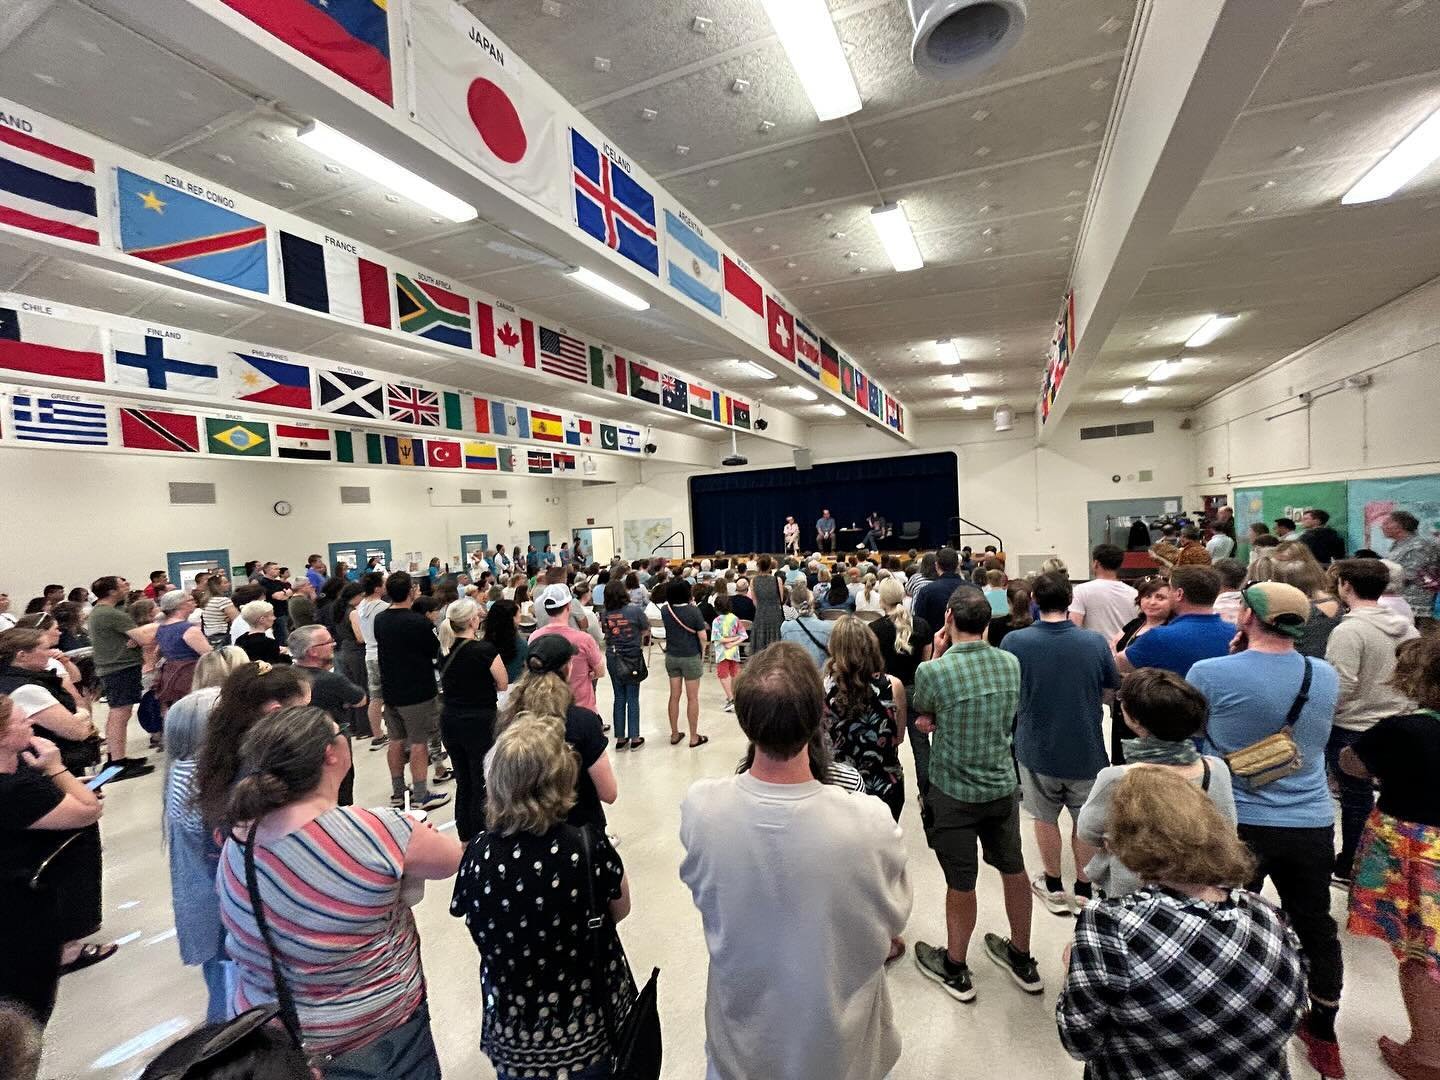 We could feel the love for Raleigh Park last night with our over 300 attendees that overflowed to the back and sides of our cafeteria. It was a beautiful, visual representation of the power of a community schools that foster student connectedness.

T